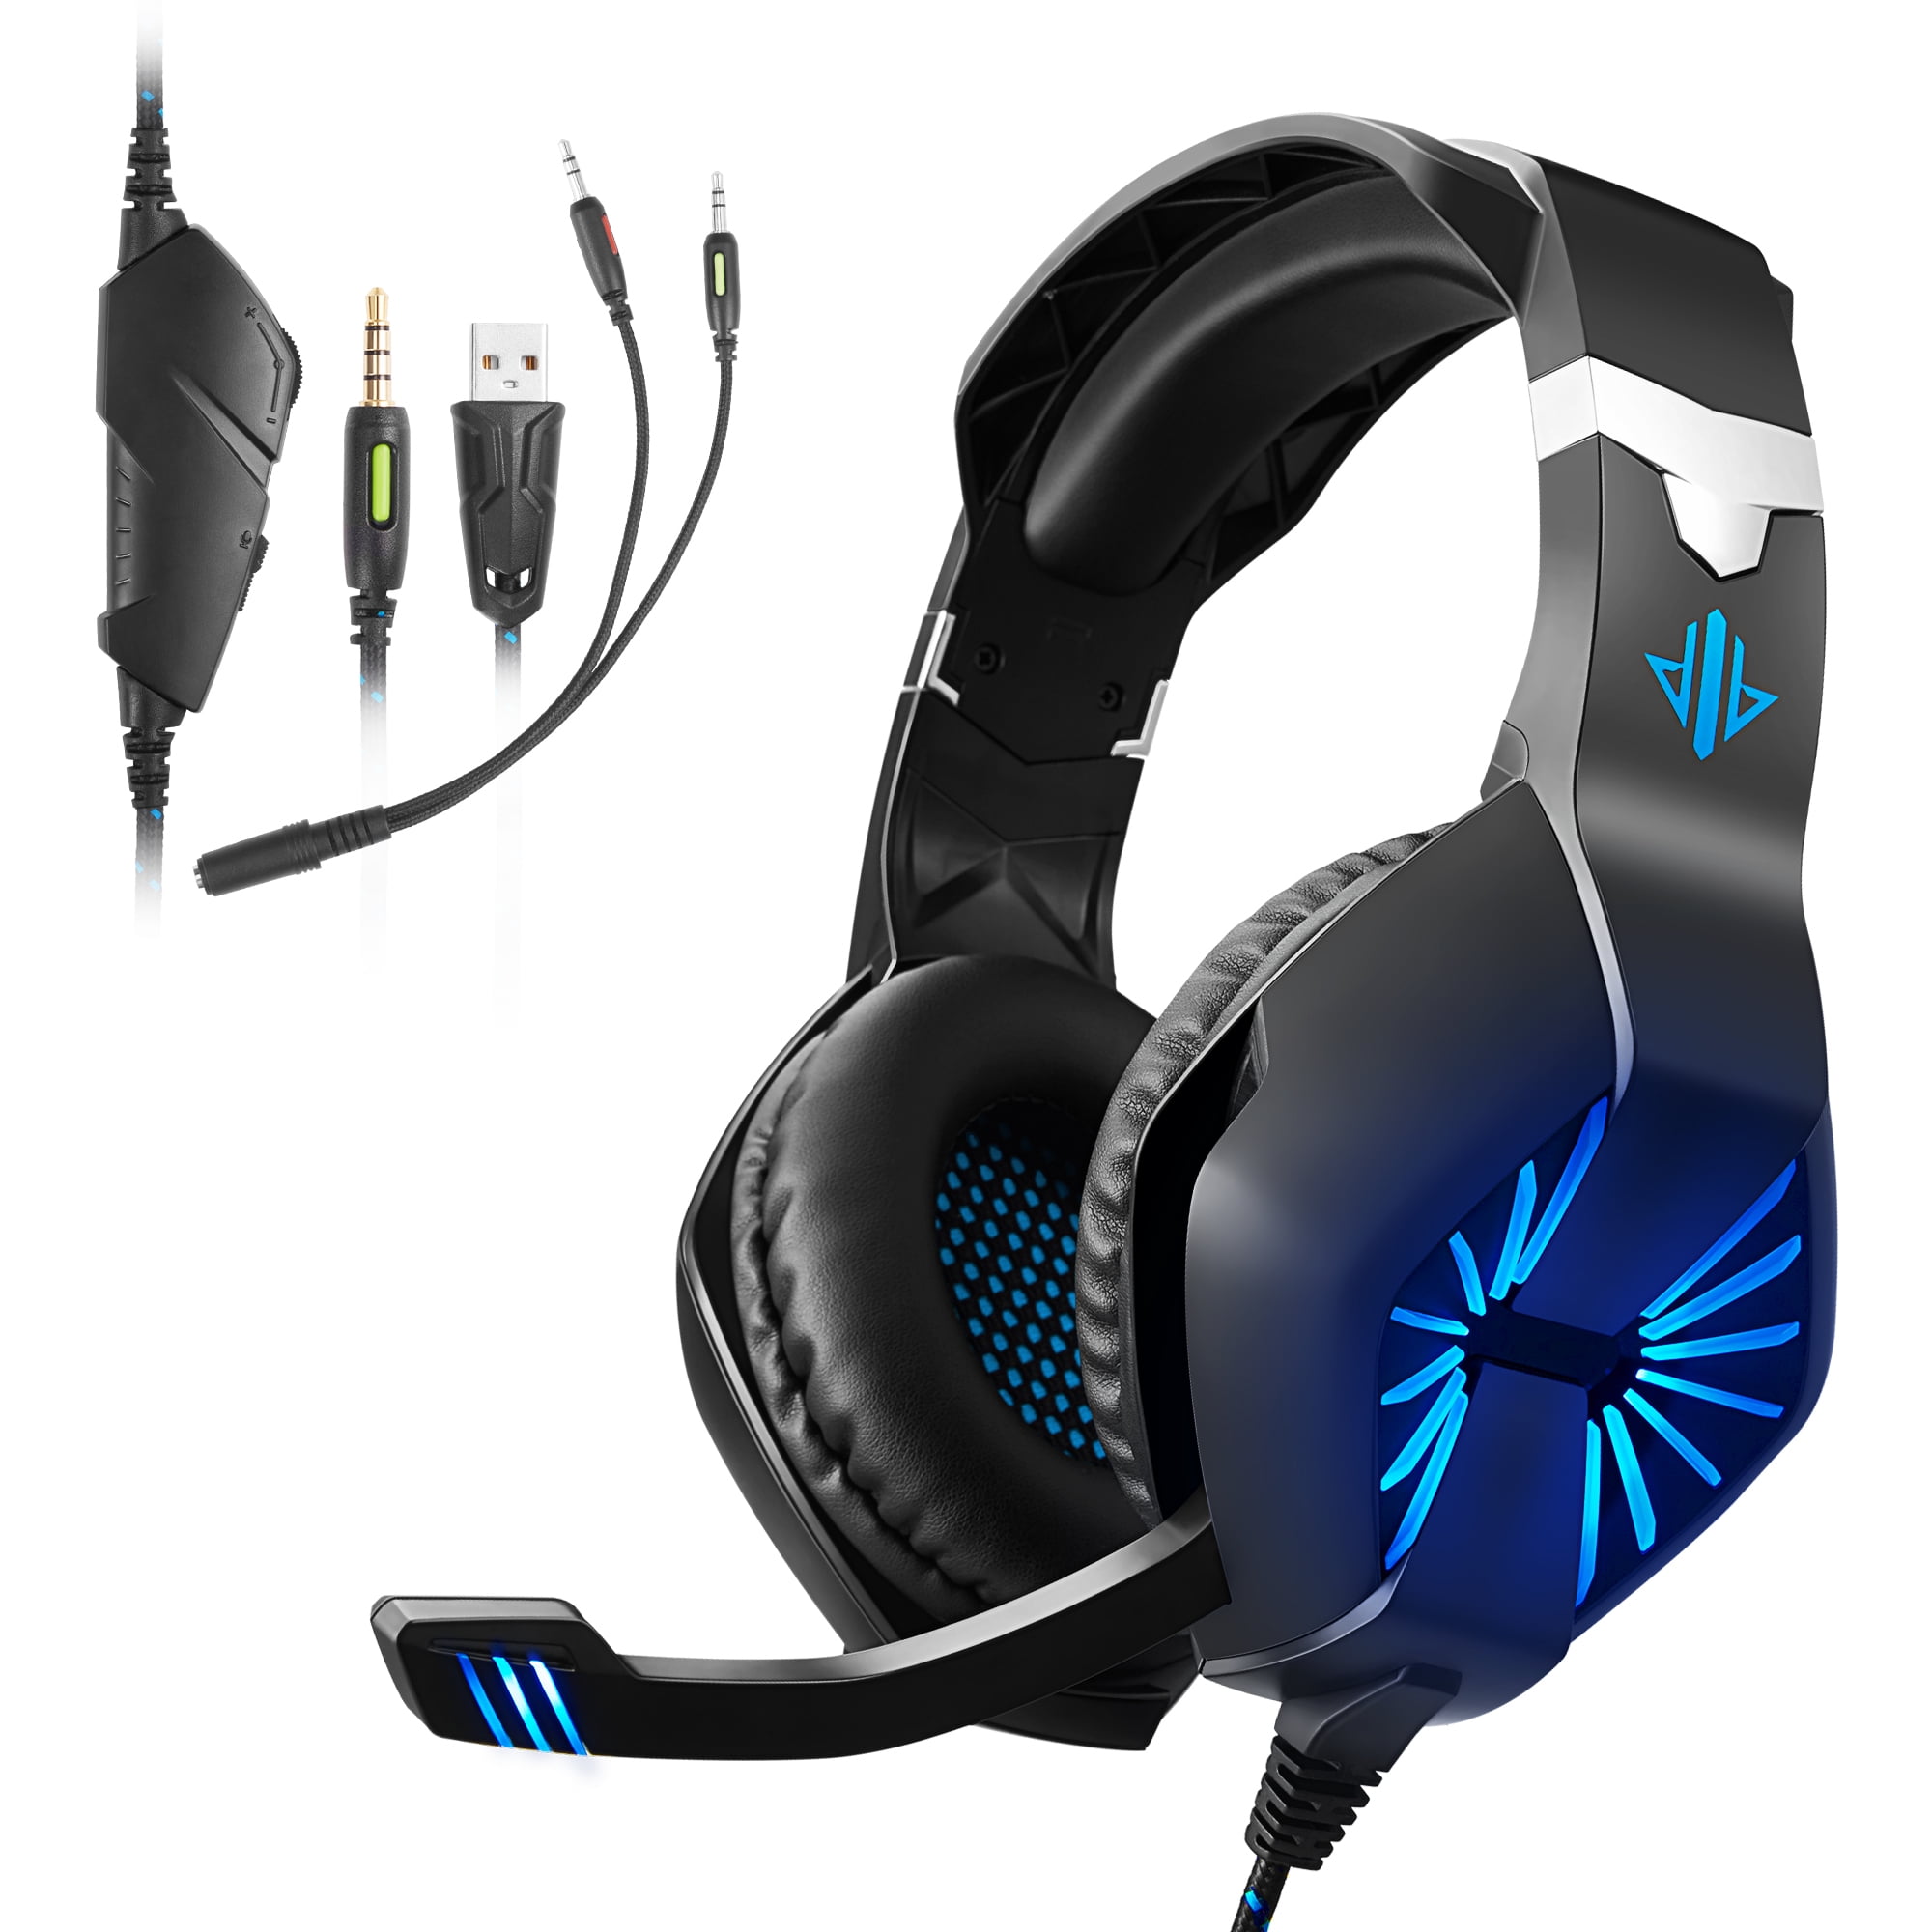 Onregelmatigheden Koel rivaal ODDGOD Gaming Headset PS4 Headset with Mic, Surround Sound & LED Light Xbox  One Headset, Gaming headphones PC Headset with Noise Canceling for PS4, PC,  Mac, Xbox One (Adapter Not Included) -